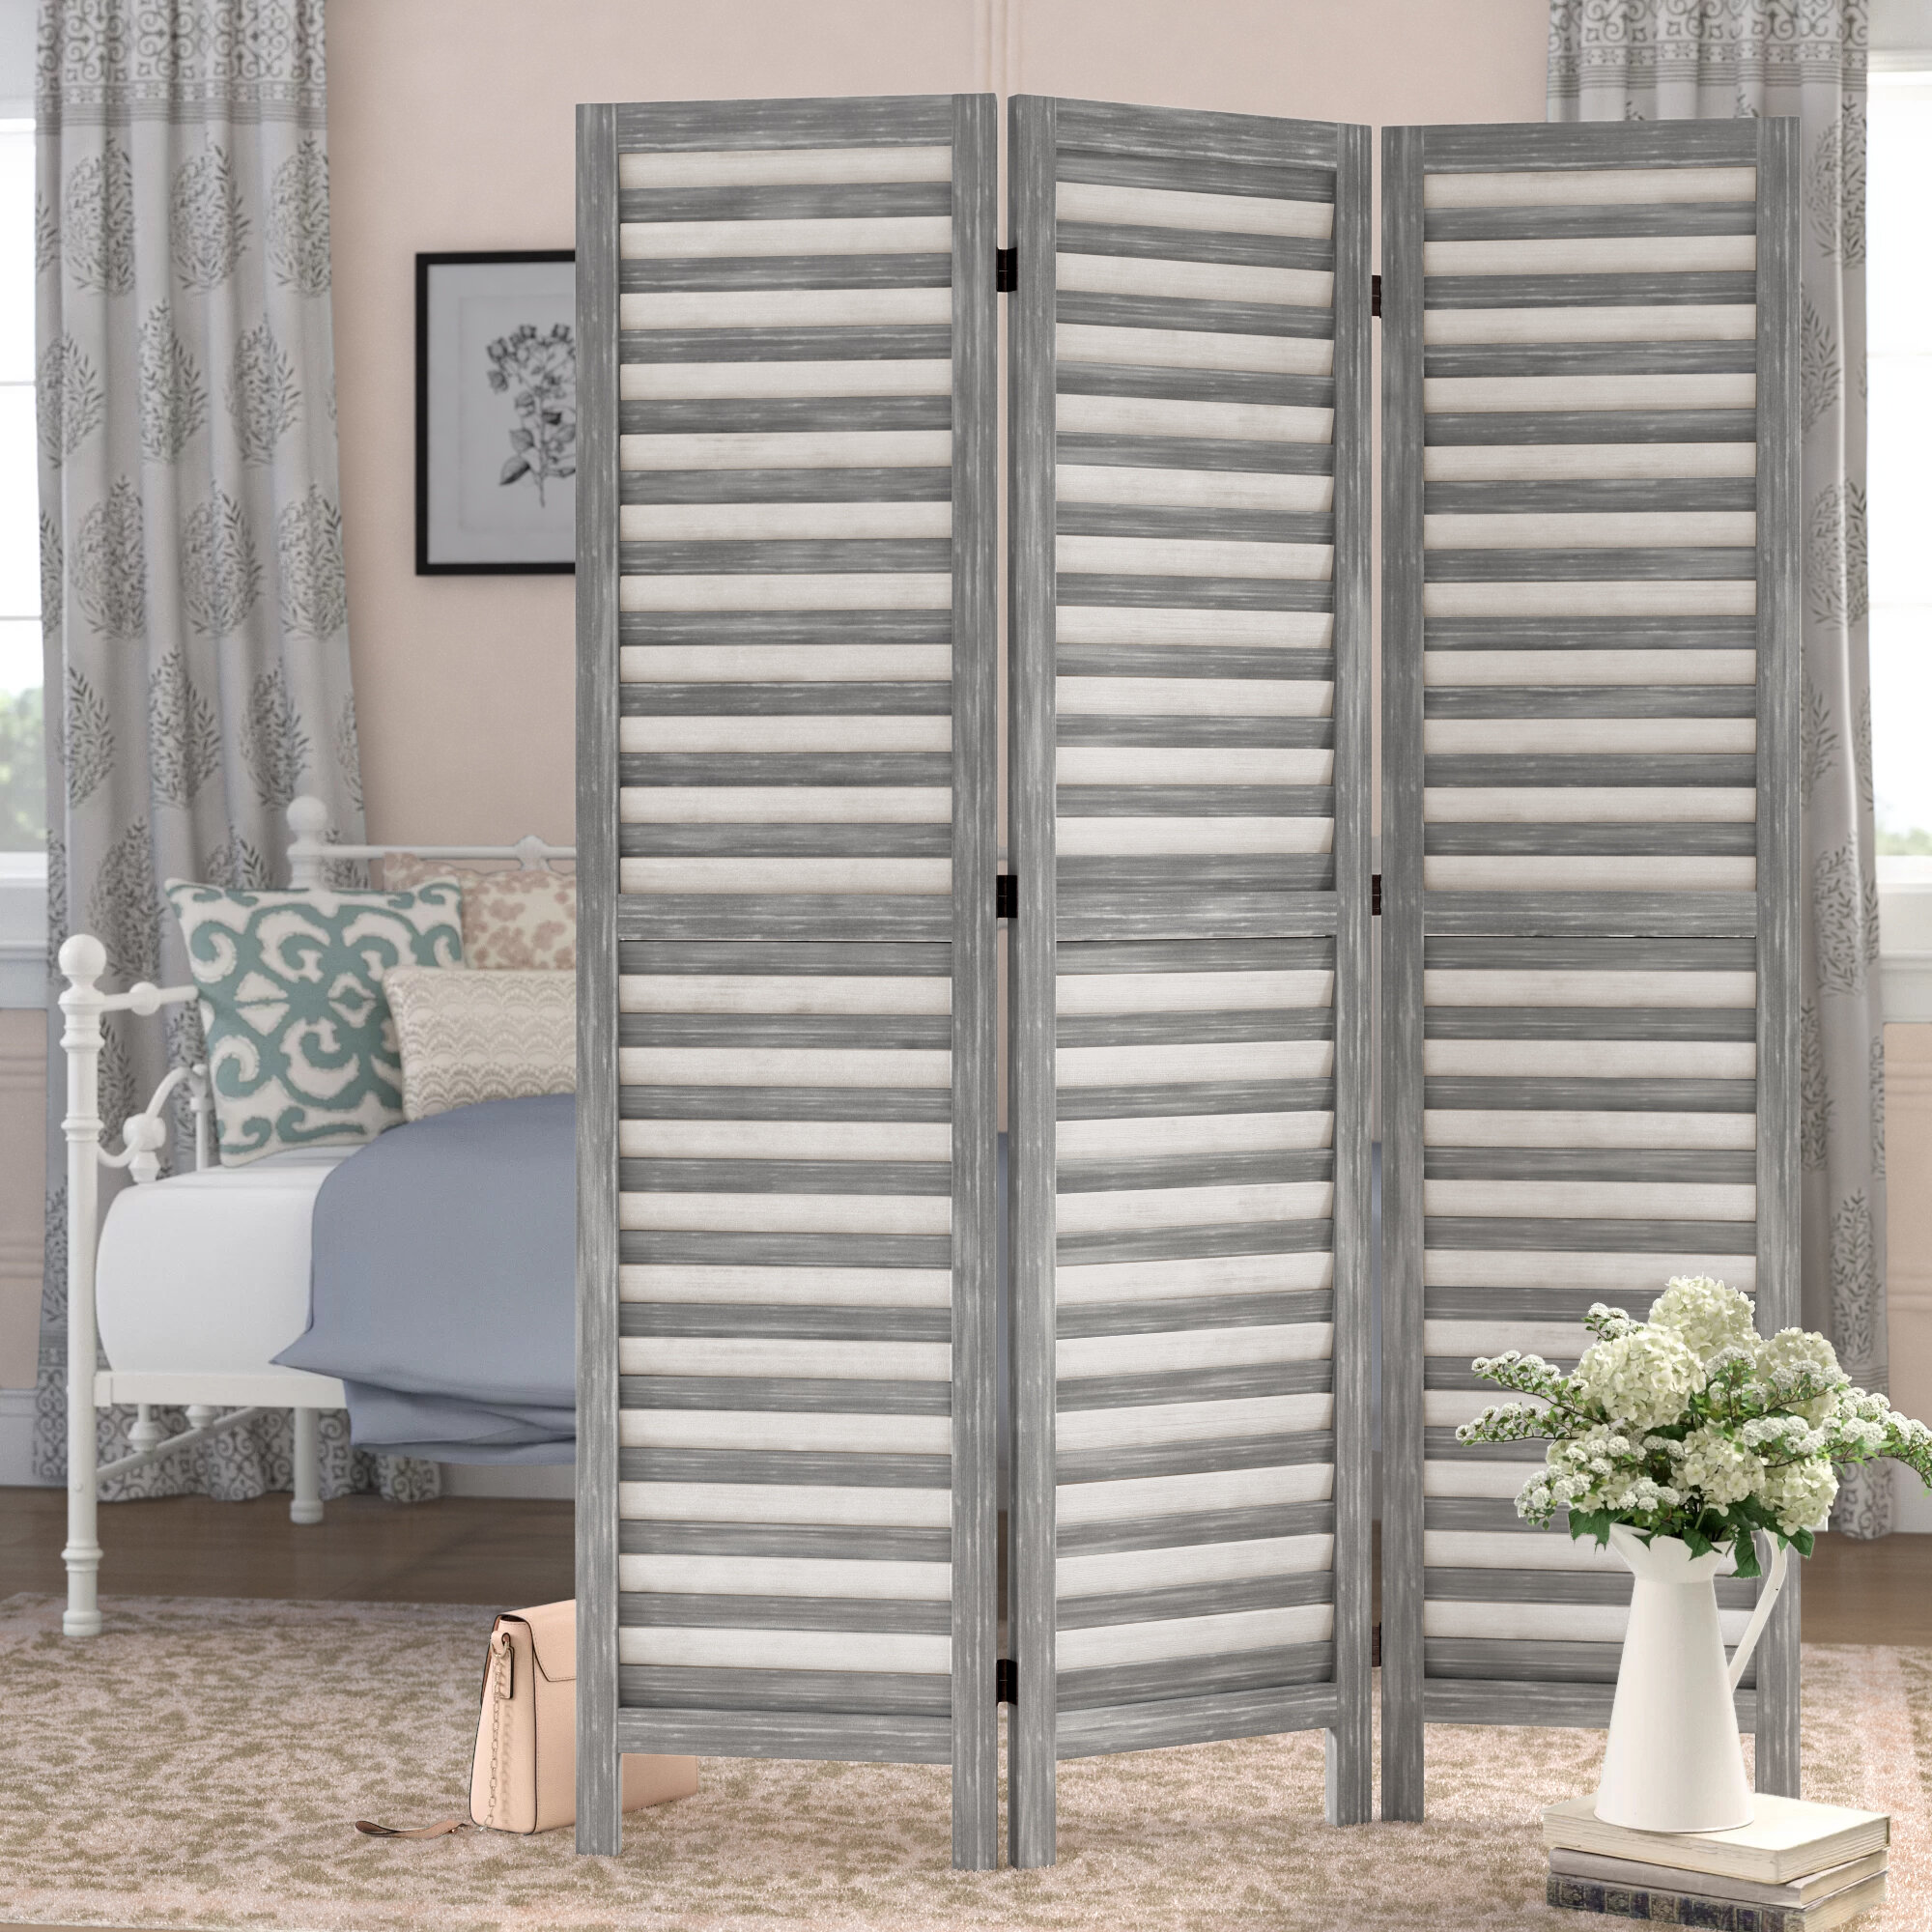 Details about   Room Divider 3 Panel Privacy Screen Folding Geometric Modern Wood Divide Bedroom 